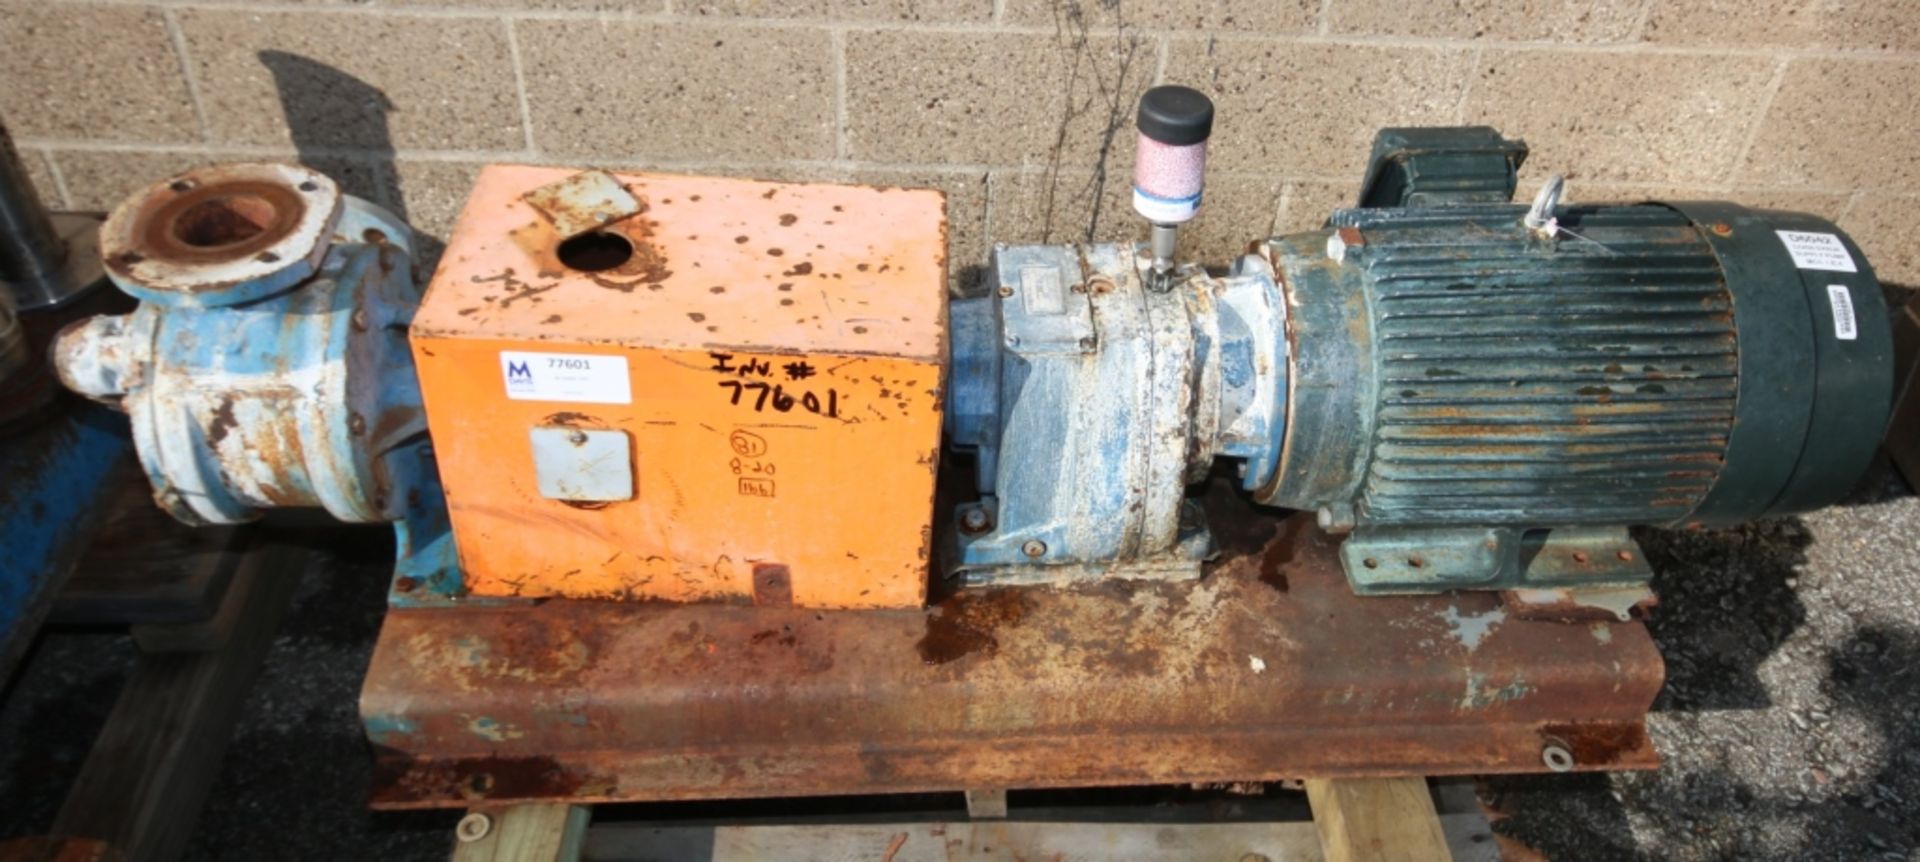 Viking 15 hp Corn Syrup Centrifugal Pump, Model L125, with 1760 rpm Motor, 230/460V 3 Phase, 3" x 3"